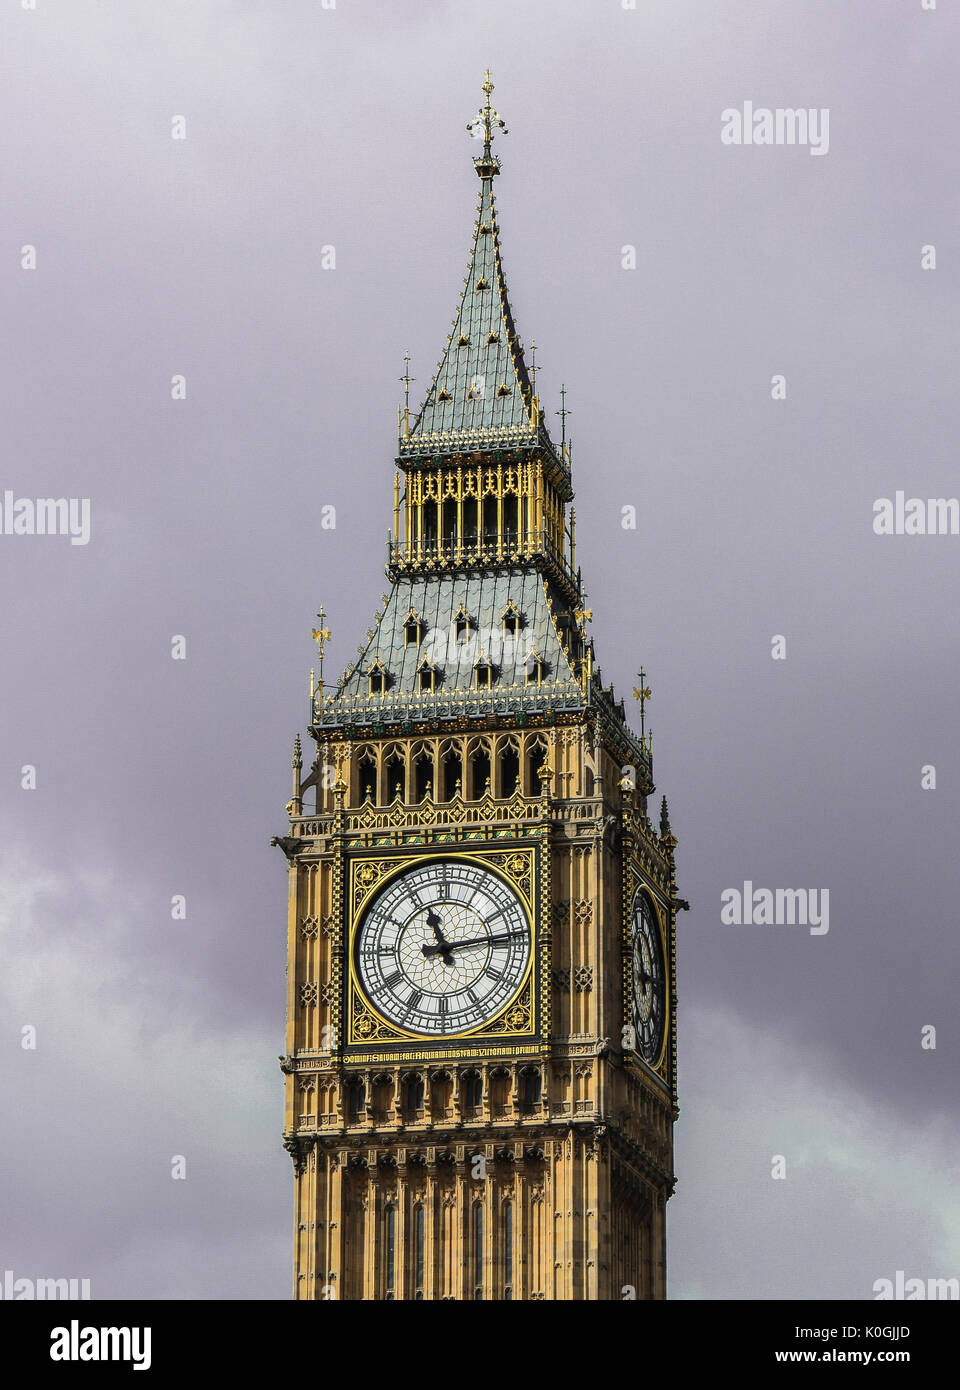 Close up of the clock face of Big Ben in Westminster, London on a clear sunny day. Stock Photo